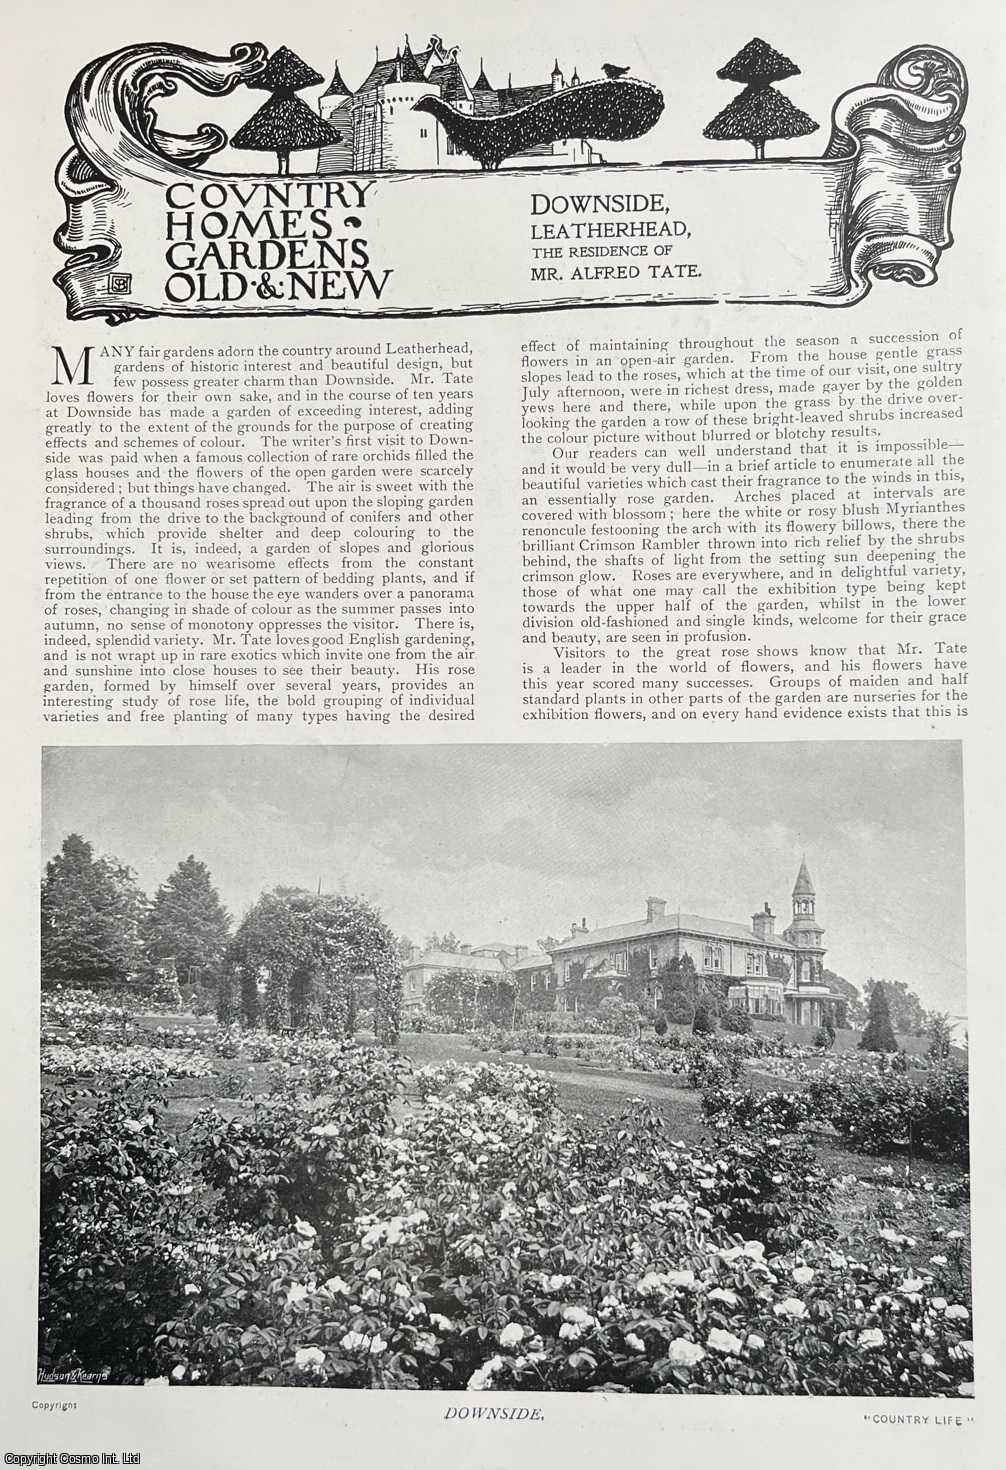 COUNTRY LIFE - Downside, Leatherhead, Surrey. Several pictures and accompanying text, removed from an original issue of Country Life Magazine, 1898.